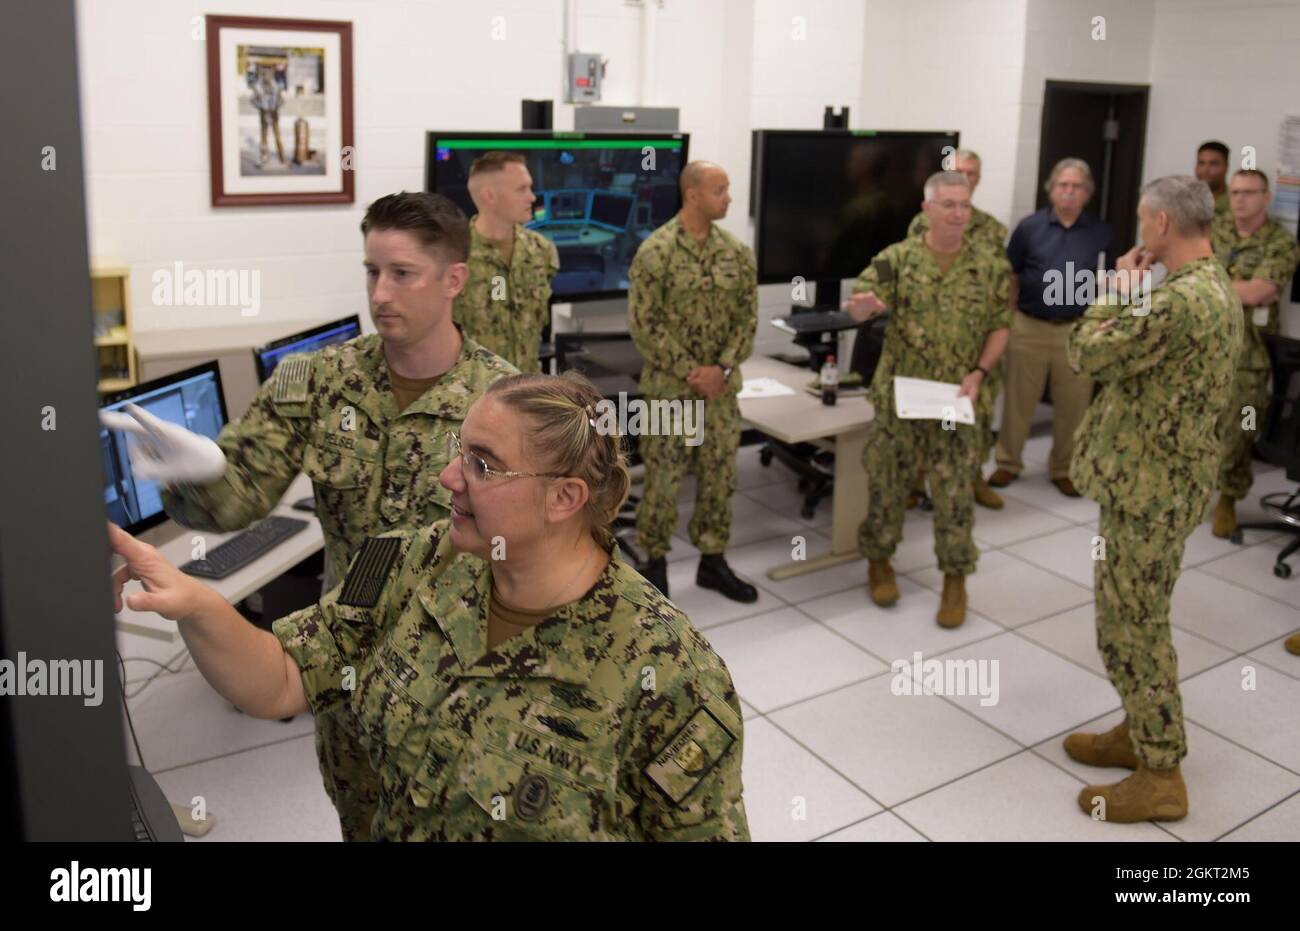 210624-N-XX139-0026 PENSACOLA, Fla. (June 24, 2021) Rear Adm. James Butler, (center with paper) commander, Naval Information Force Reserve (CNIFR) along with CNIFR’s Command Master Chief Kristie Barbier (front left), participate in a Multipurpose Reconfigurable Training System 3D® (MRTS 3D®) technology training device demonstration and discussion with staff at the Center for Information Warfare Training and Information Warfare Training Command (IWTC) Corry Station. The two visited for a familiarization brief and tour of CIWT and IWTC Corry Station to review information warfare training initiat Stock Photo